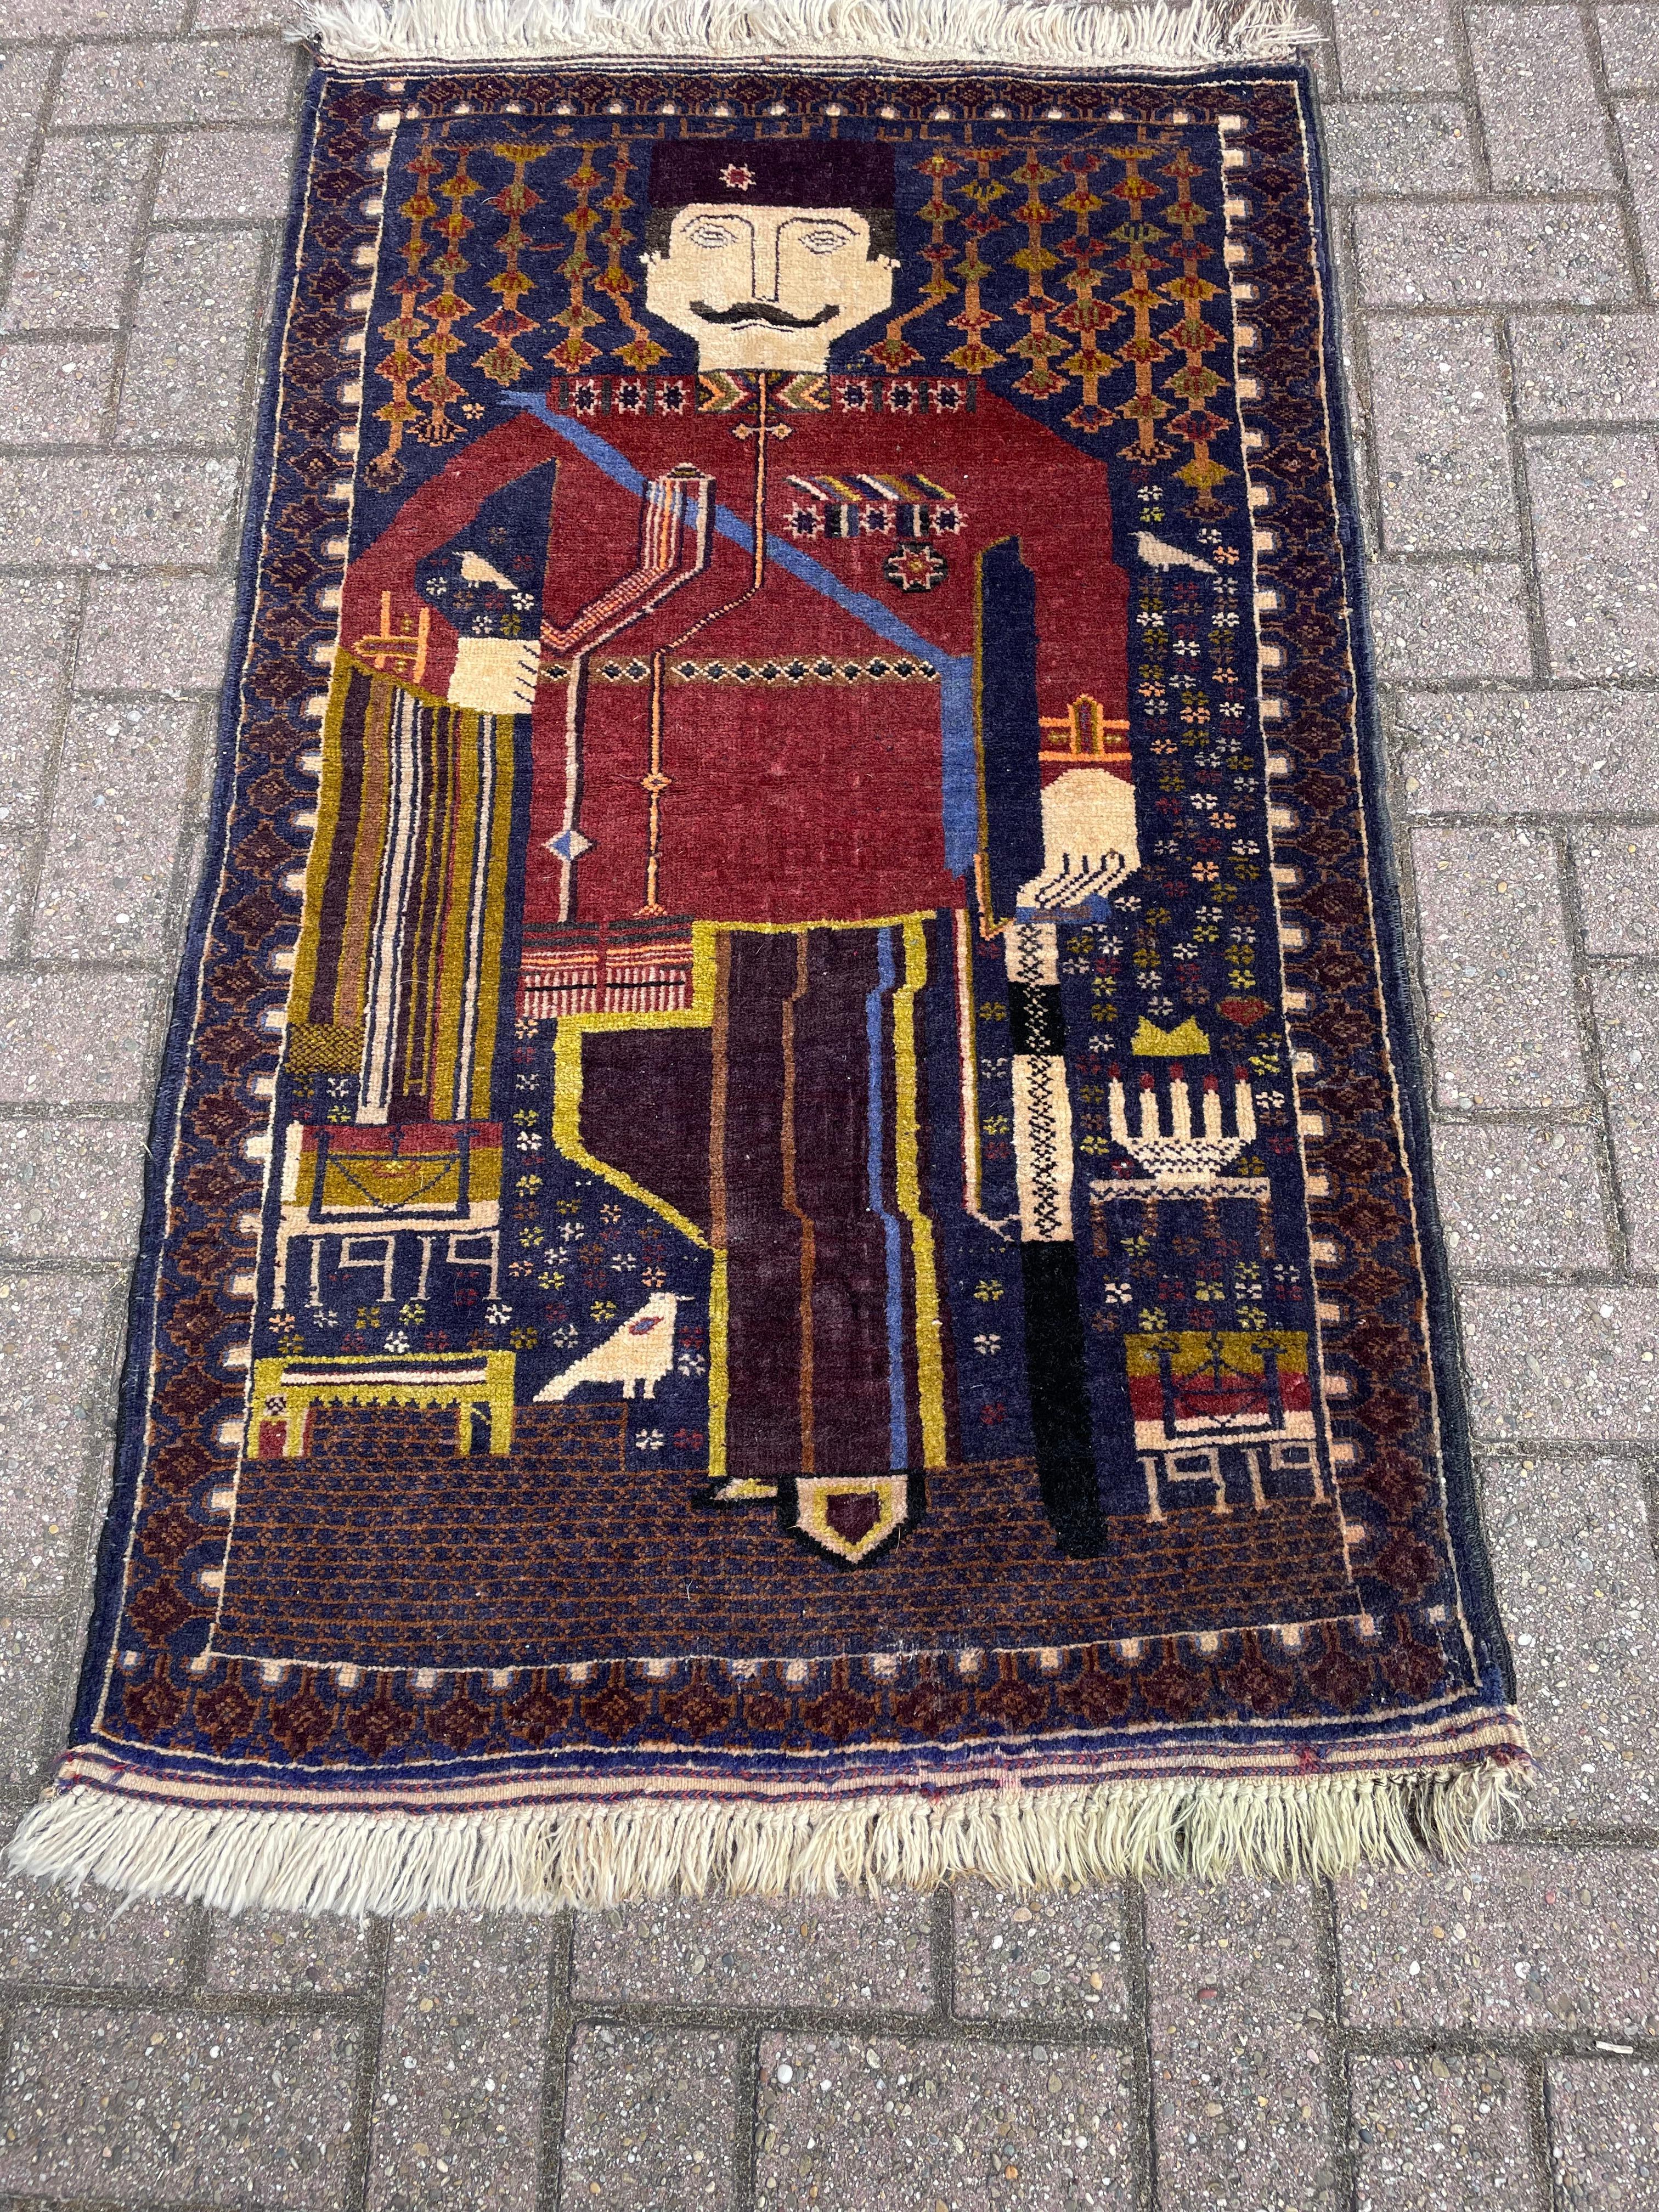 Wool Rare Hand-Knotted War Rug Depicting Reign & King Amanullah Khan 1919 Afghanistan For Sale